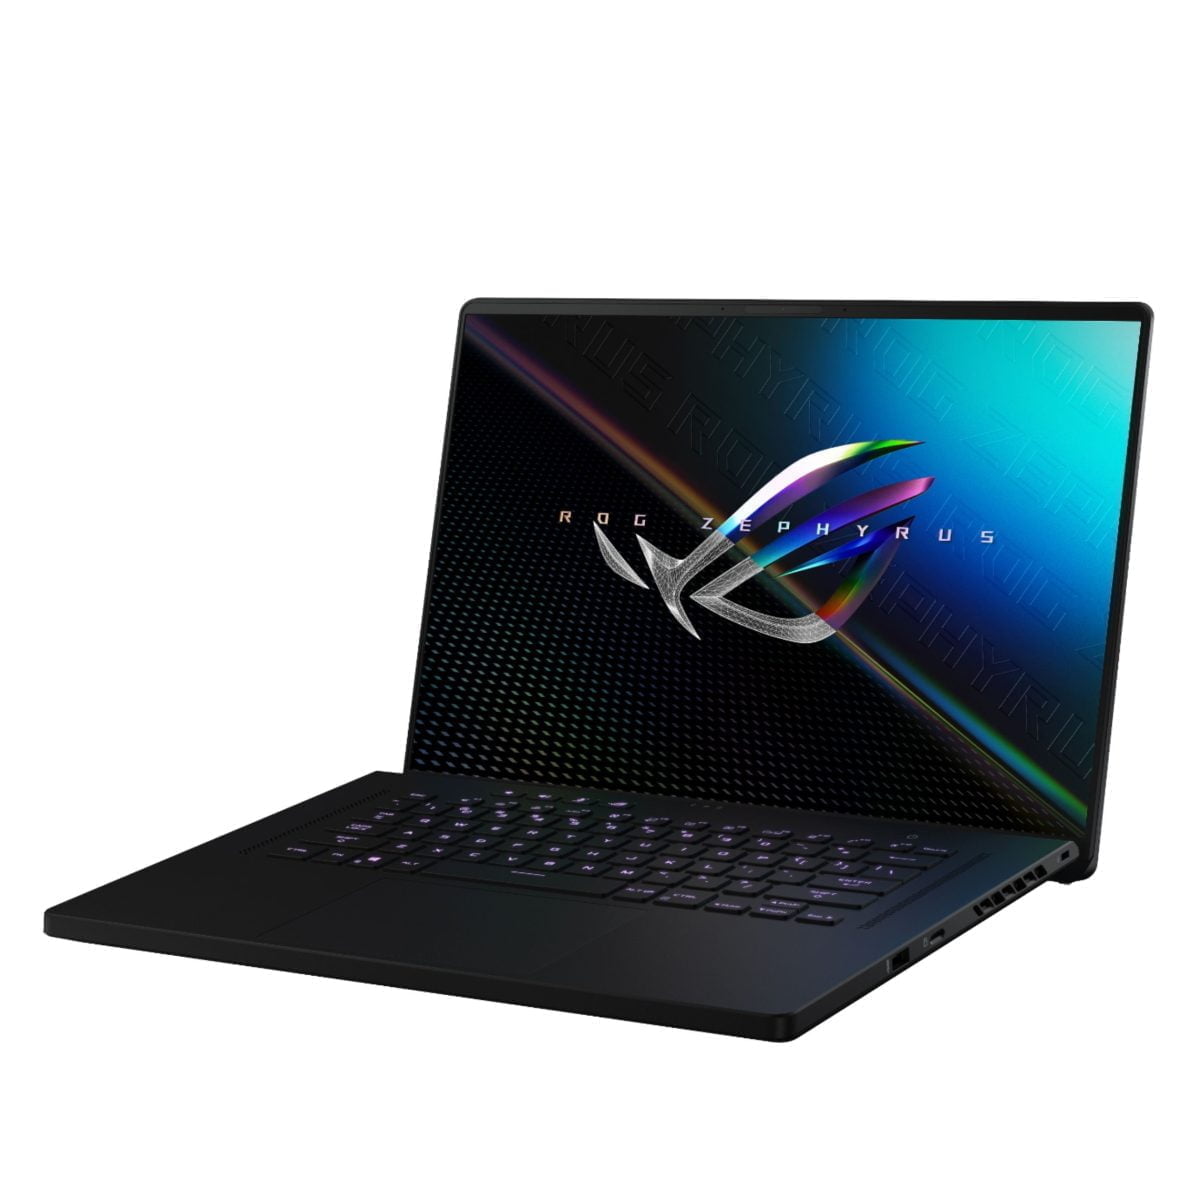 6464203 Rd Scaled Asus &Amp;Lt;H1 Class=&Amp;Quot;Heading-5 V-Fw-Regular&Amp;Quot;&Amp;Gt;Asus - Rog Zephyrus M16 Gu603 Gaming Laptop - Intel Core I9 - 16Gb Memory - Nvidia Rtx3060 - 1Tb Ssd - Off Black&Amp;Lt;/H1&Amp;Gt;&Amp;Lt;Div Class=&Amp;Quot;Wpview Wpview-Wrap&Amp;Quot; Data-Wpview-Text=&Amp;Quot;Https%3A%2F%2Fyoutu.be%2Fmjlzzqnixki&Amp;Quot; Data-Wpview-Type=&Amp;Quot;Embedurl&Amp;Quot;&Amp;Gt;&Amp;Lt;Span Class=&Amp;Quot;Mce-Shim&Amp;Quot;&Amp;Gt;&Amp;Lt;/Span&Amp;Gt;&Amp;Lt;Span Class=&Amp;Quot;Wpview-End&Amp;Quot;&Amp;Gt;&Amp;Lt;/Span&Amp;Gt;&Amp;Lt;/Div&Amp;Gt;&Amp;Lt;P&Amp;Gt;Asus Rog Gaming Laptop. Enjoy Everyday Gaming With This Asus Notebook Pc. The 11Th Gen Intel Core I9 Processor And 16Gb Of Ram Let You Run Graphics-Heavy Games Smoothly, While The Potent Nvidia Rtx3060 Graphics Produce High-Quality Visuals On The New Fast 16-Inch 165Hz Wqxga Display. This Asus Notebook Pc Has 1Tb Ssd That Shortens Load Times And Offers Ample Storage.&Amp;Lt;/P&Amp;Gt; Asus Rog Gaming Laptop Asus - Rog Zephyrus M16 Gu603 Gaming Laptop - Intel Core I9 - 16Gb Memory - Nvidia Rtx3060 - 1Tb Ssd - Off Black